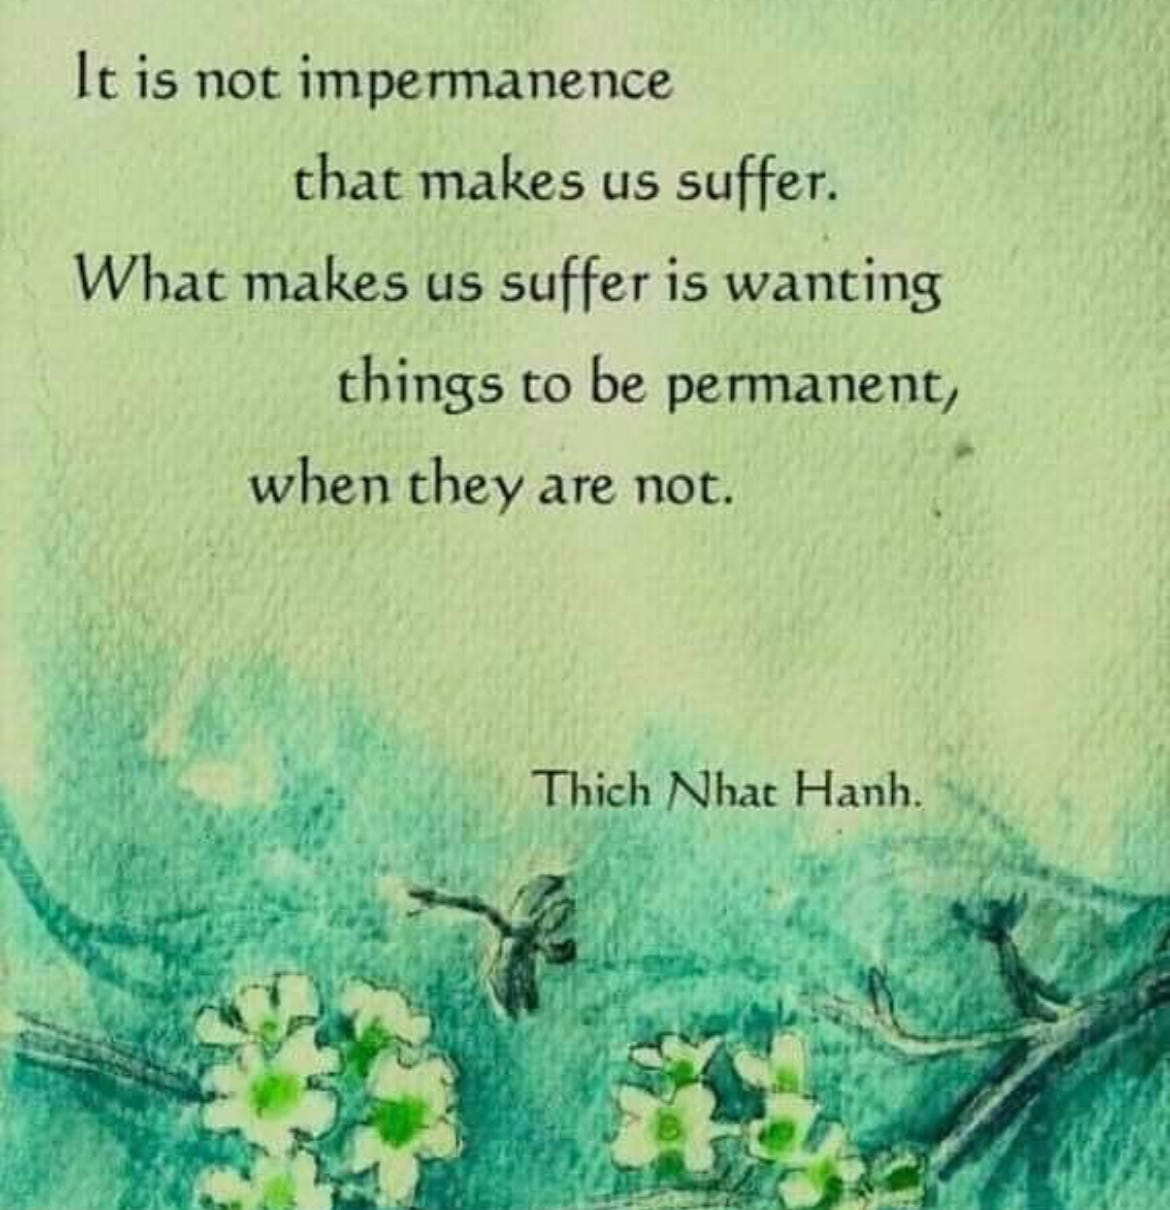 Lama Surya Das on Twitter: "It's not impermanence that makes us suffer.  What makes us suffer is wanting things to be permanent, when they are not. ~Thich  Nhat Hanh #LamaSuryaDas #TheAmericanLama #ThichNhatHanh #